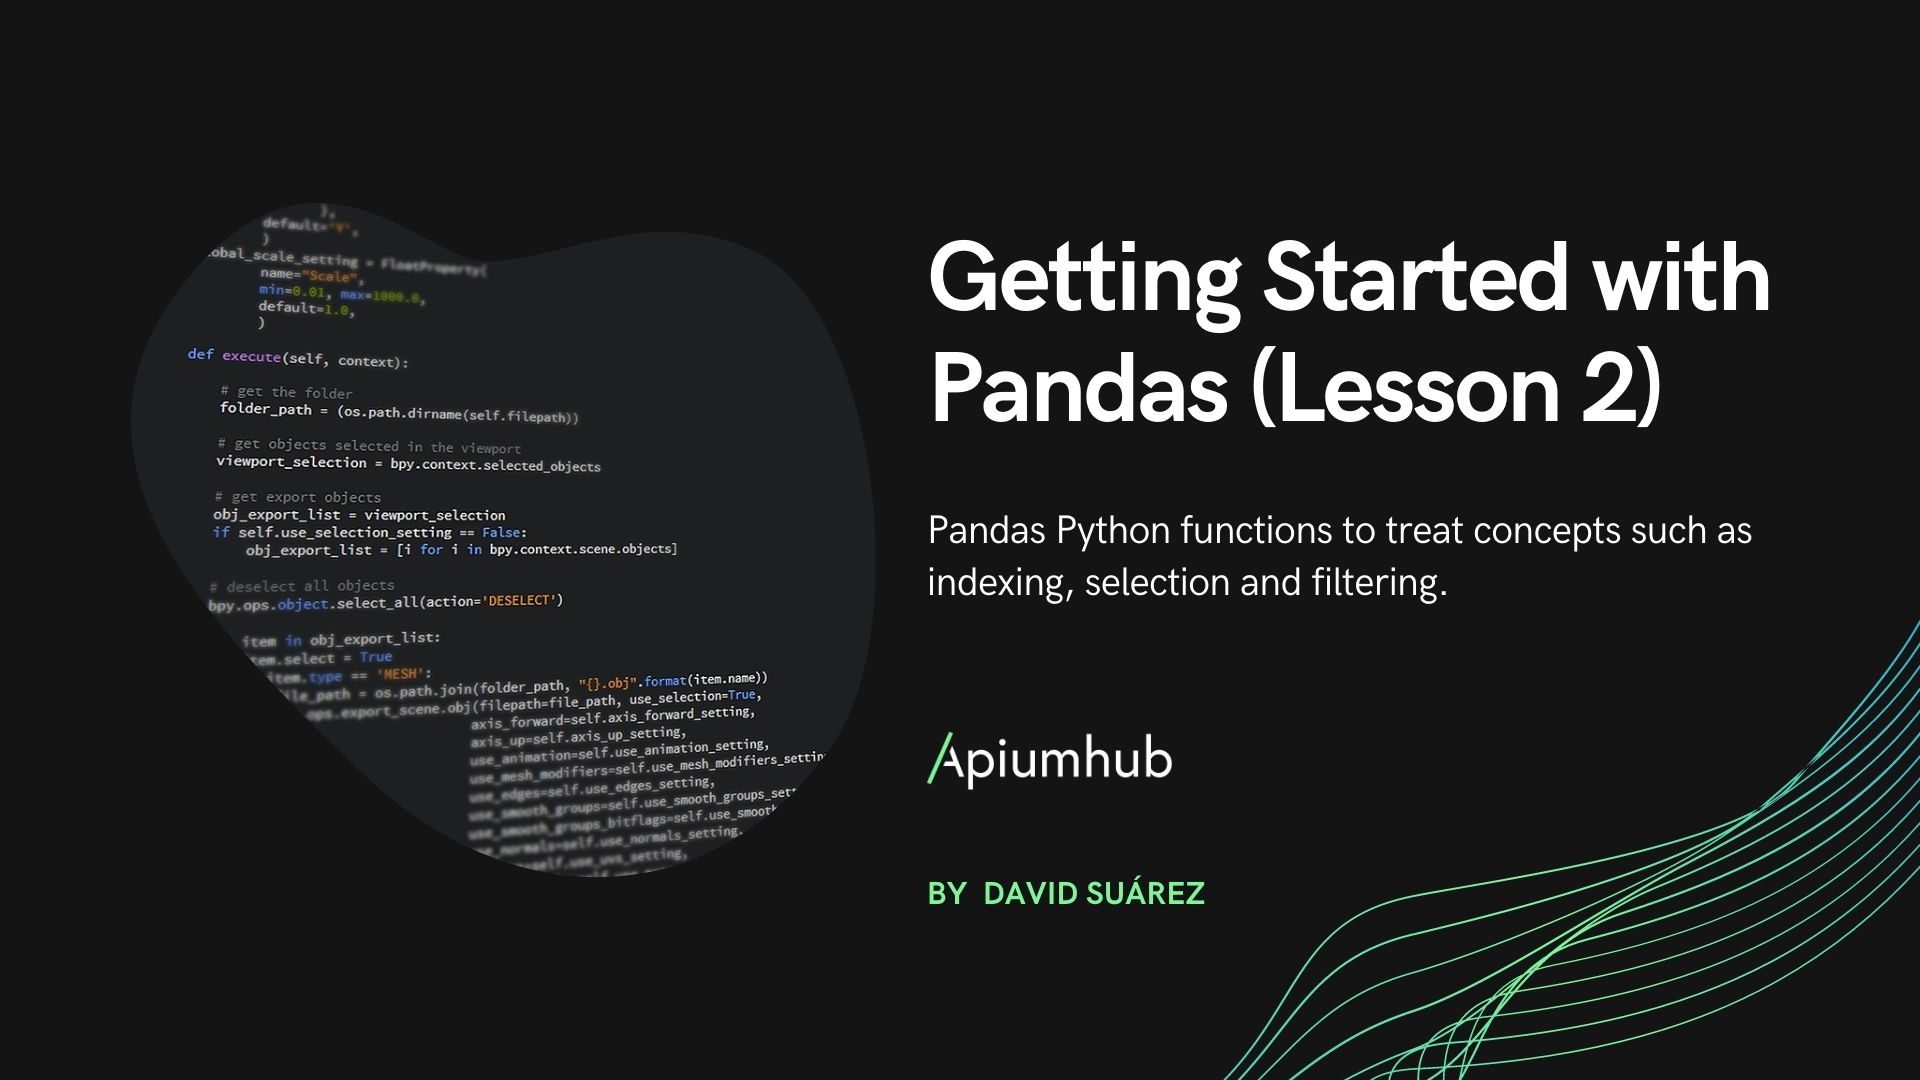 Getting Started with Pandas - Lesson 2